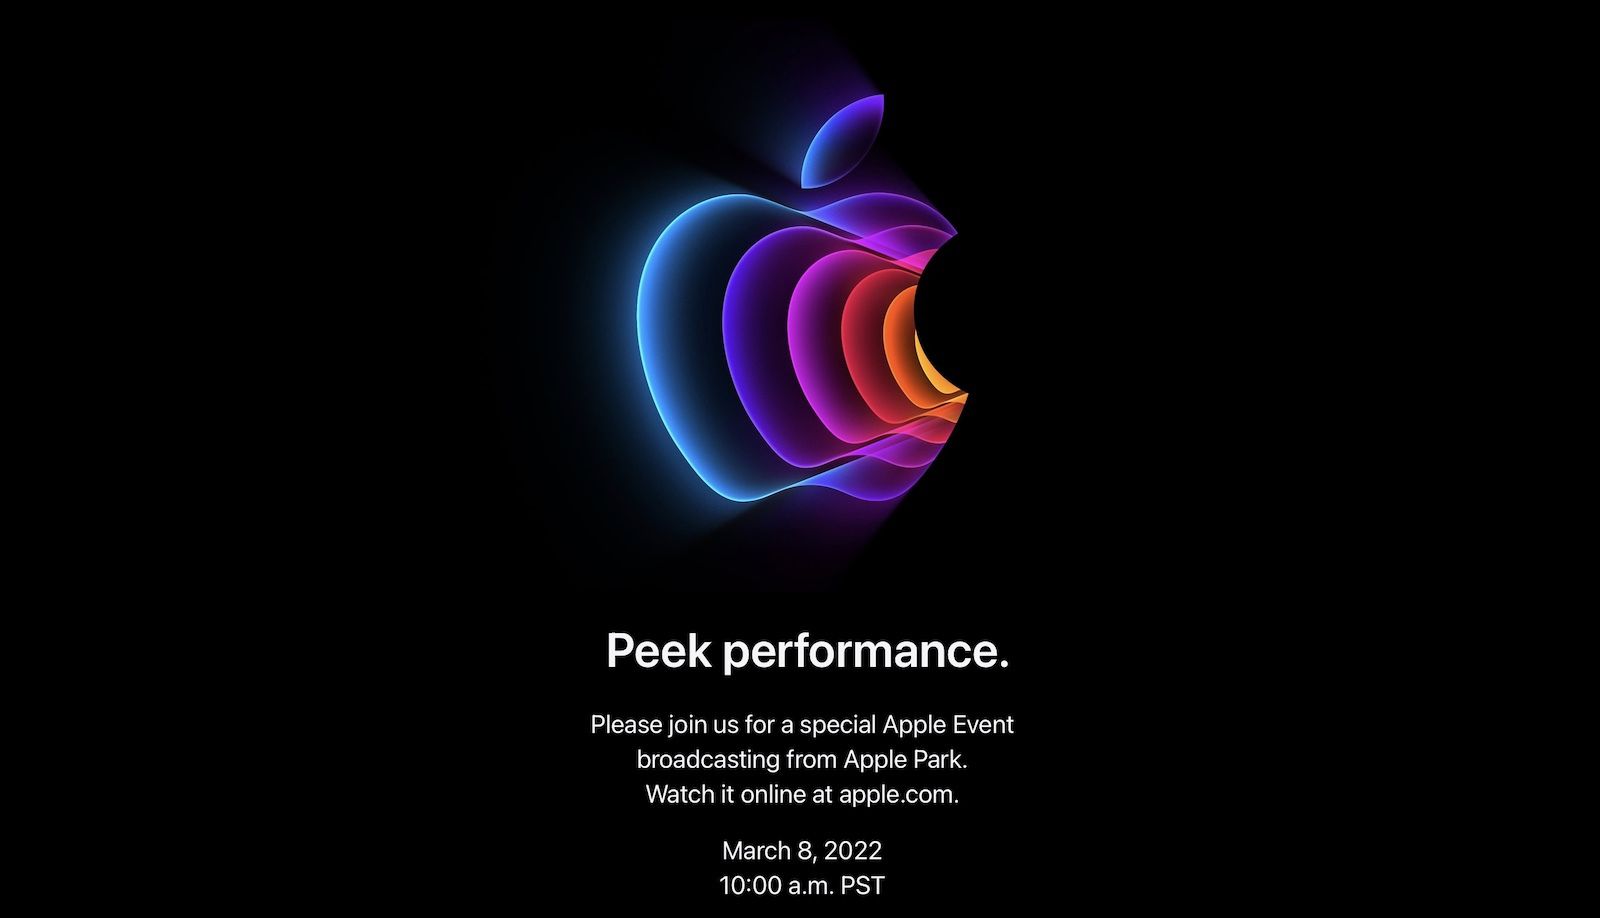 Apple Event Announced for March 8: ‘Peek Performance’ – MacRumors